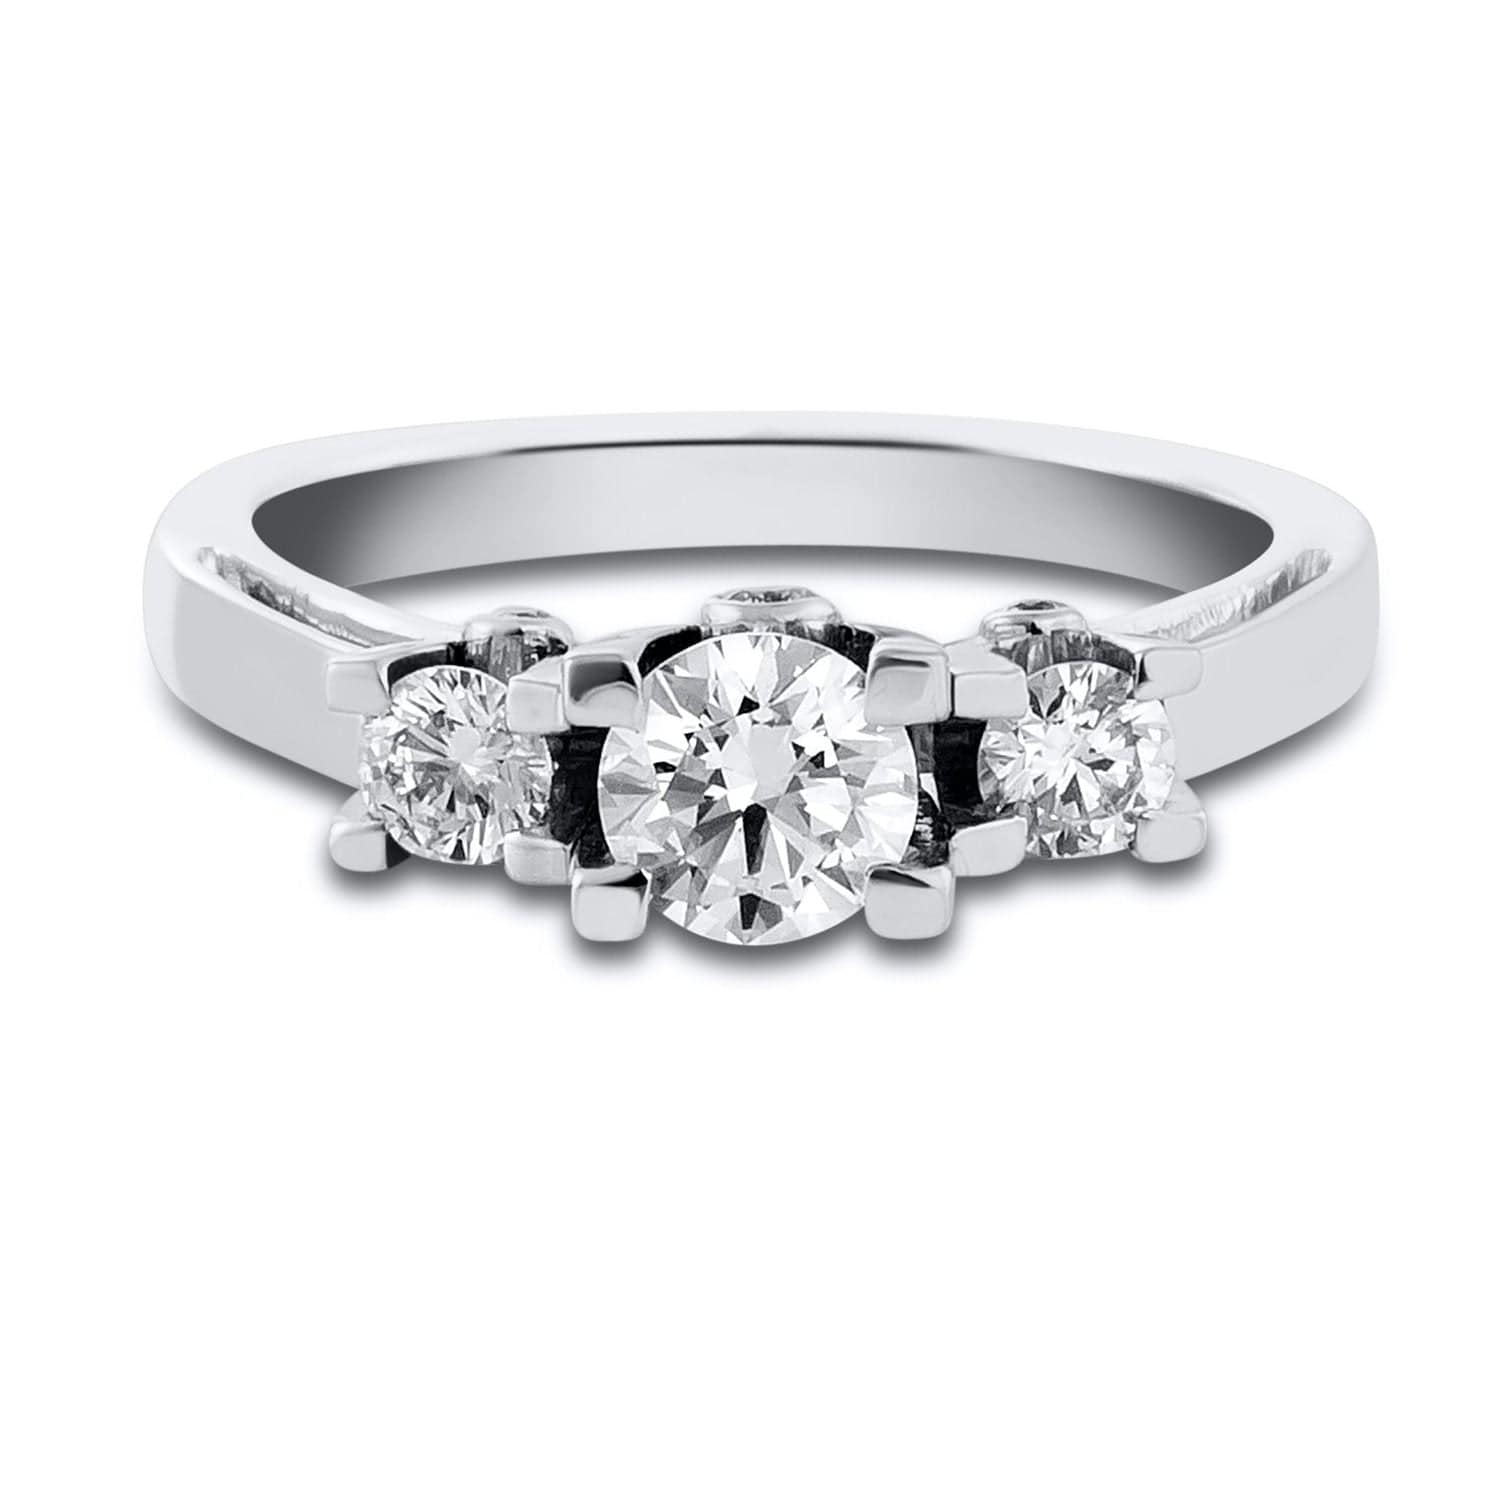 10 timeless engagement rings you can get for under $2000